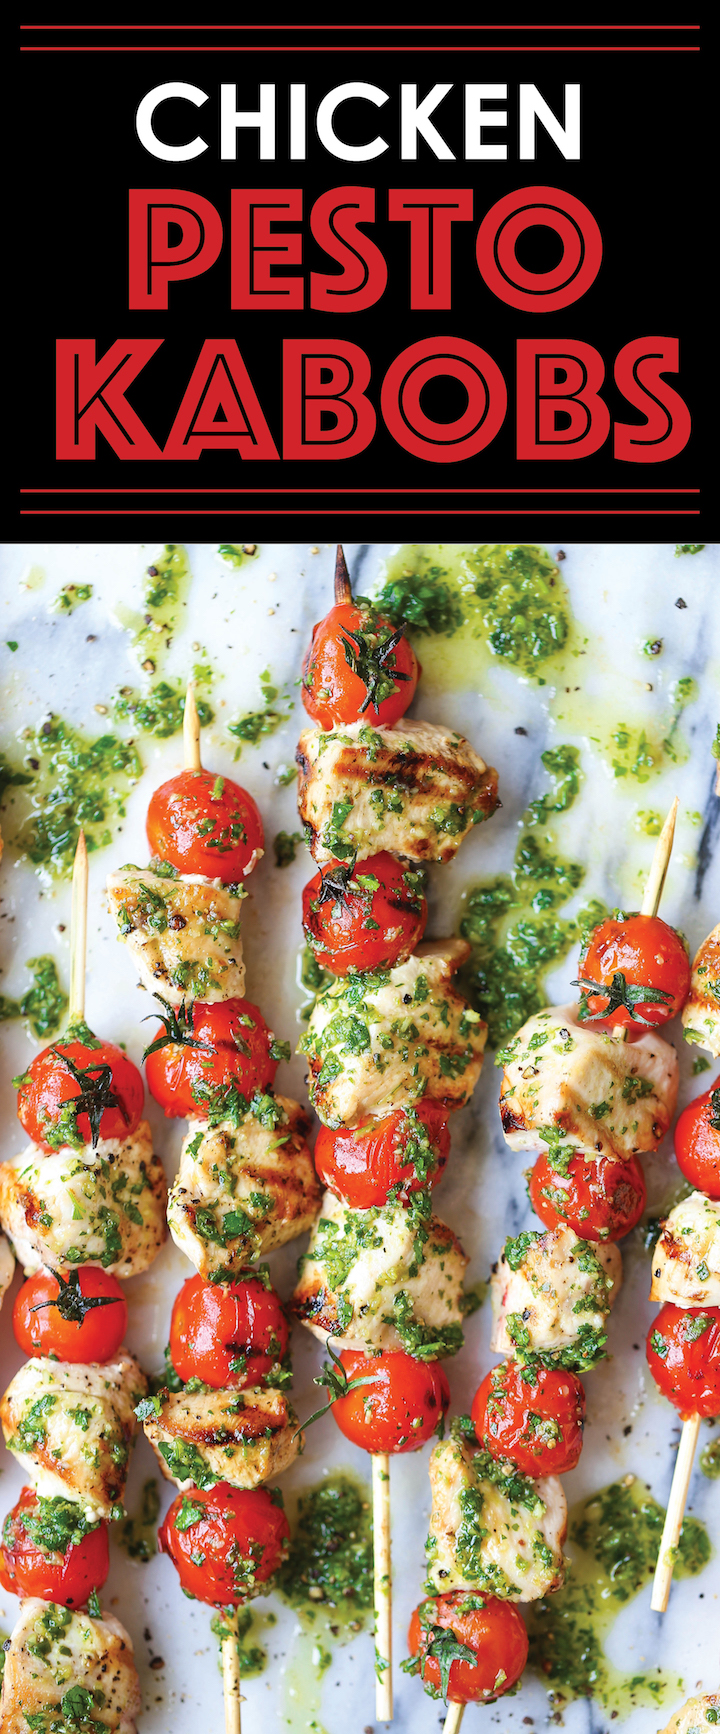 Chicken Pesto Kabobs - No-fuss 4-ingredient kabobs! Can be made ahead of time, baked or grilled so you can make this anytime, anywhere. Easy peasy.